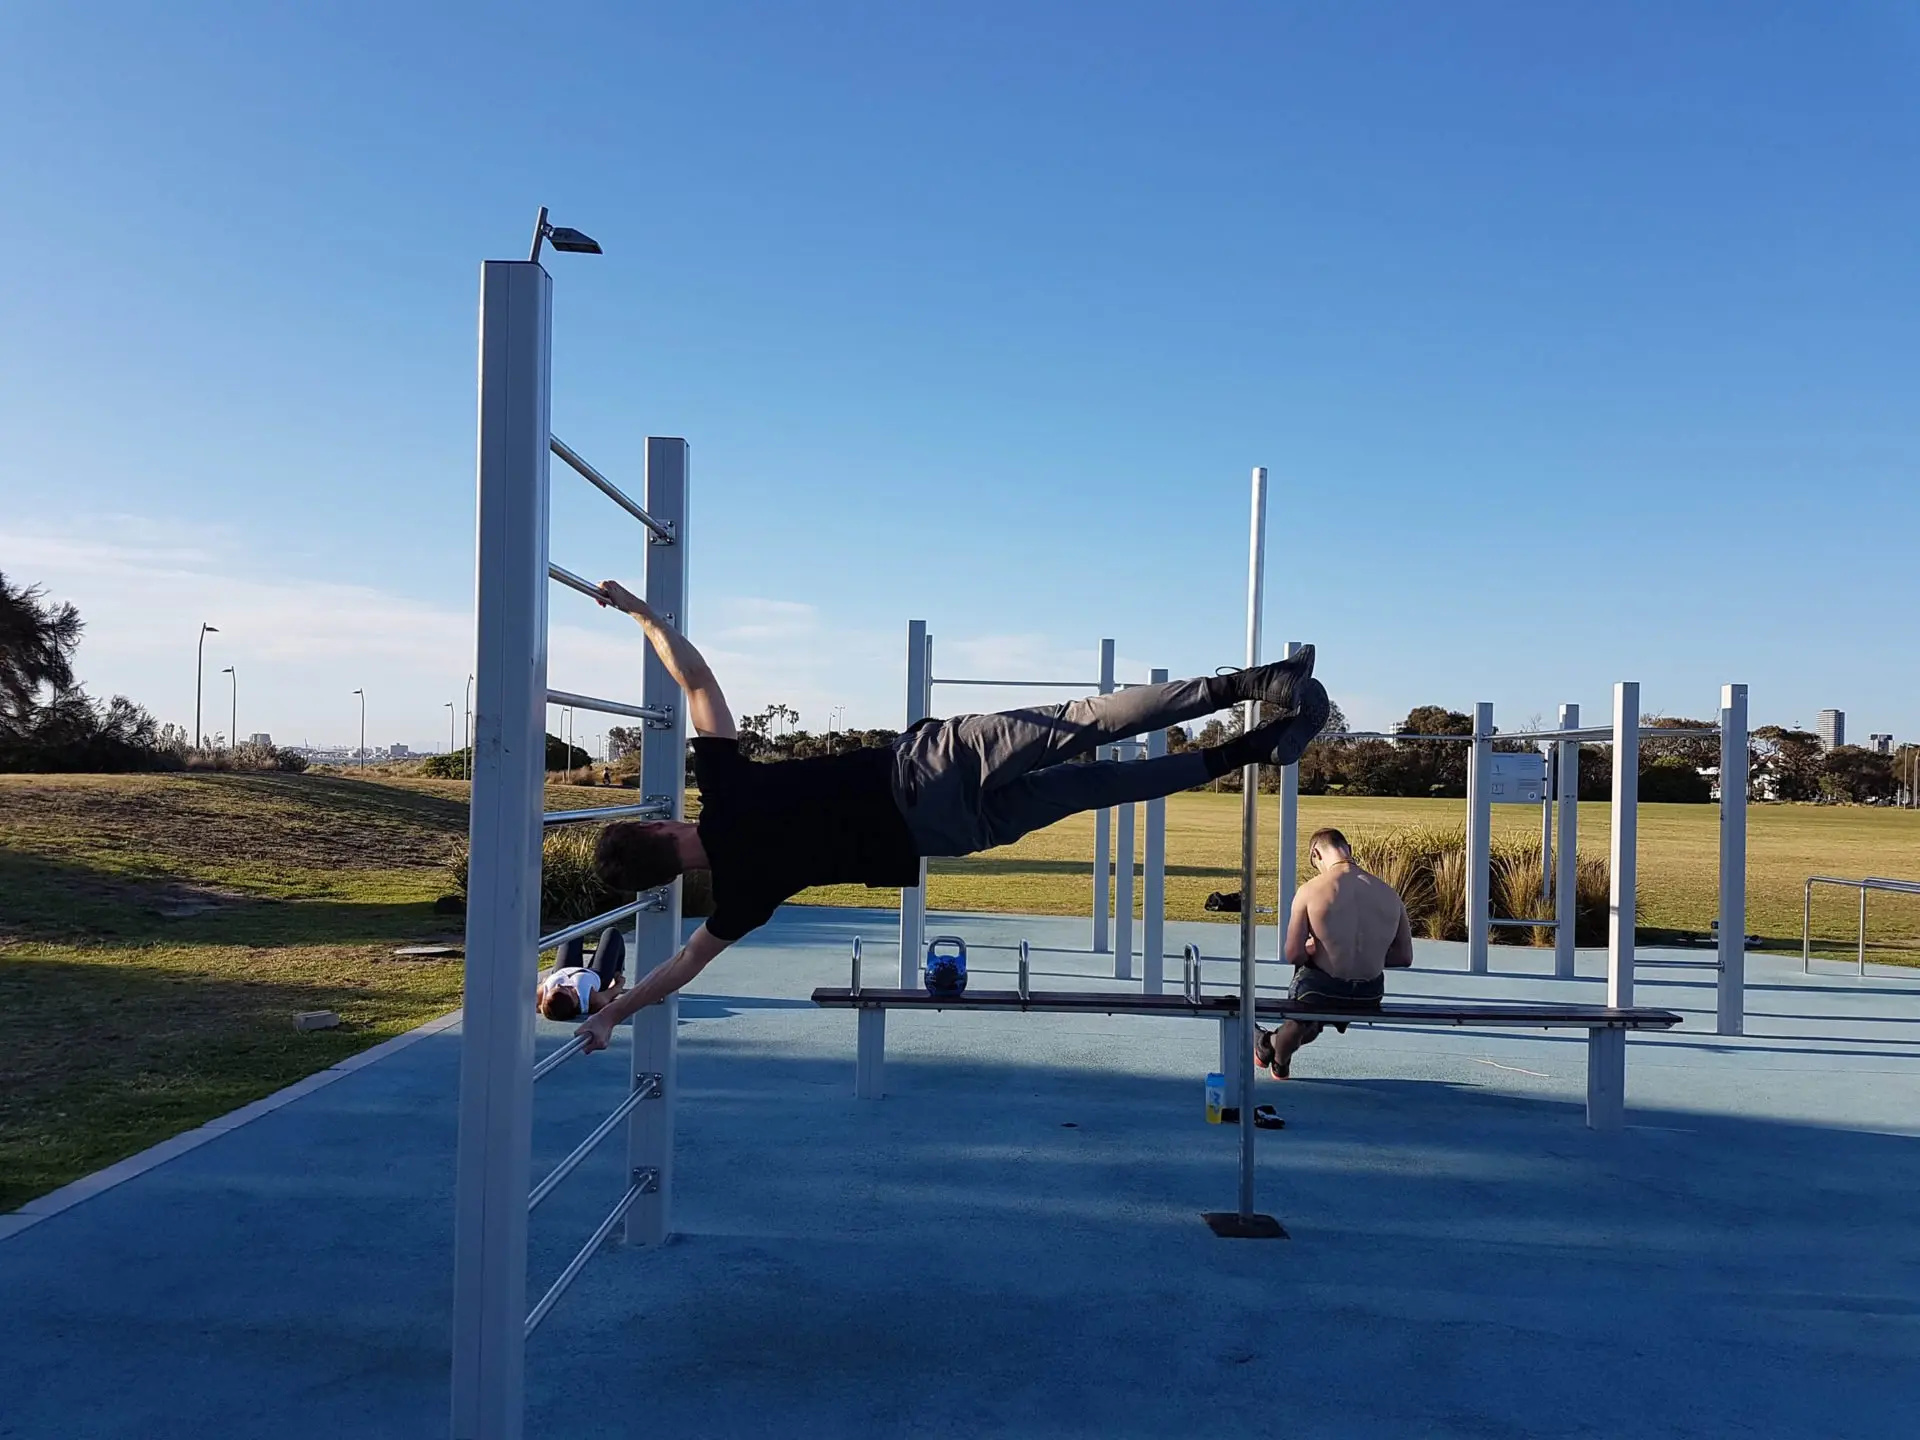 Calisthenics: A bar hold exercise, A strength exercise where the body is parallel to the ground supported by a vertical bar. 1920x1440 HD Background.